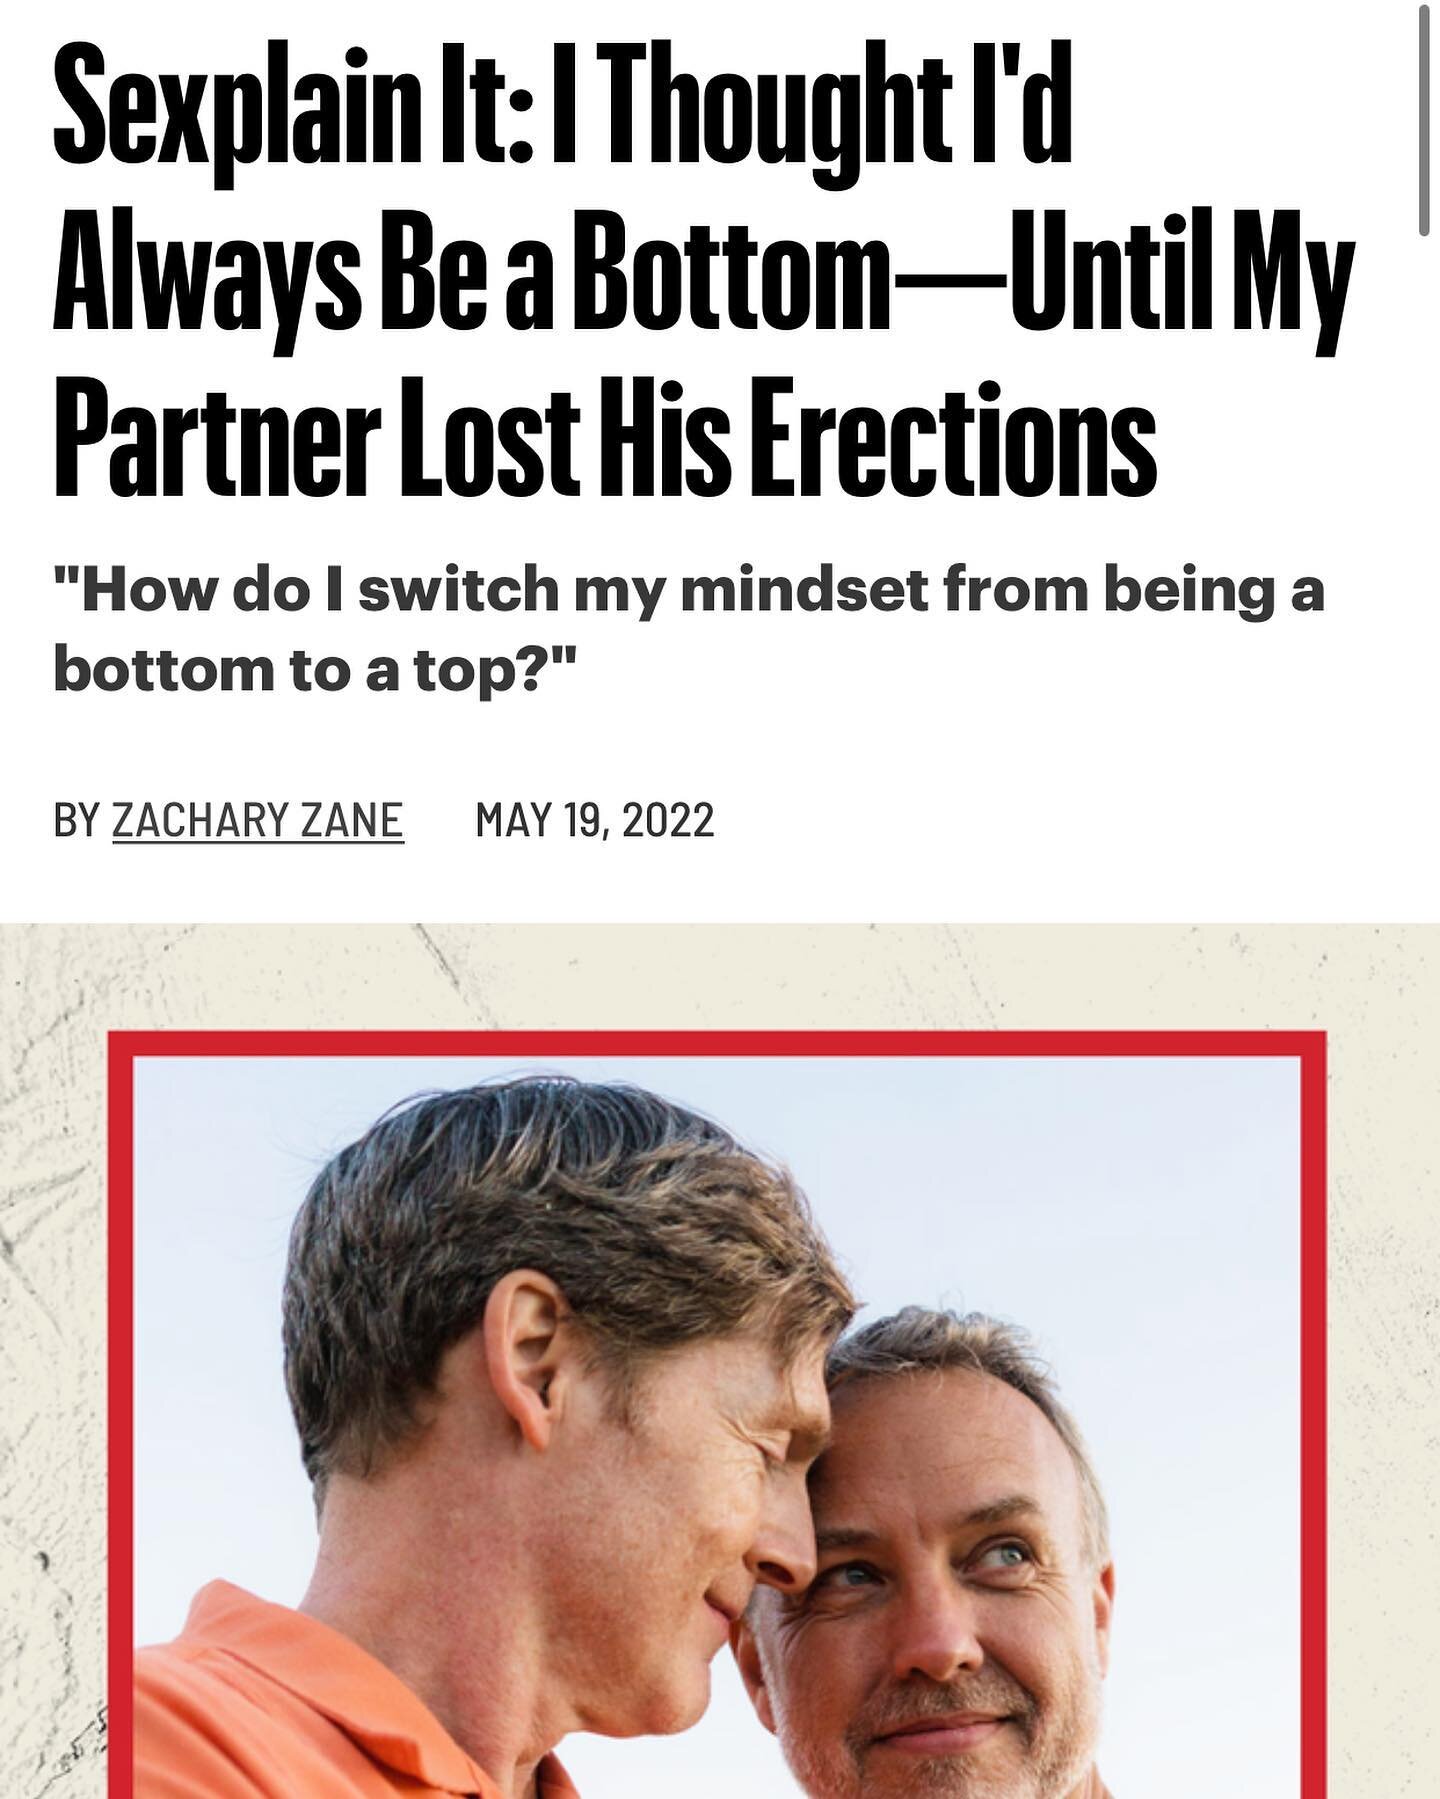 New Sexplain It from an older queer man, who, for unseen reasons, now has to top his partner! I spoke to the king of gay s*x education @bybobbybox for this one! 

&ldquo;Dear Sexplain It,

I&rsquo;ve been a bottom my entire life. My partner of 30 yea